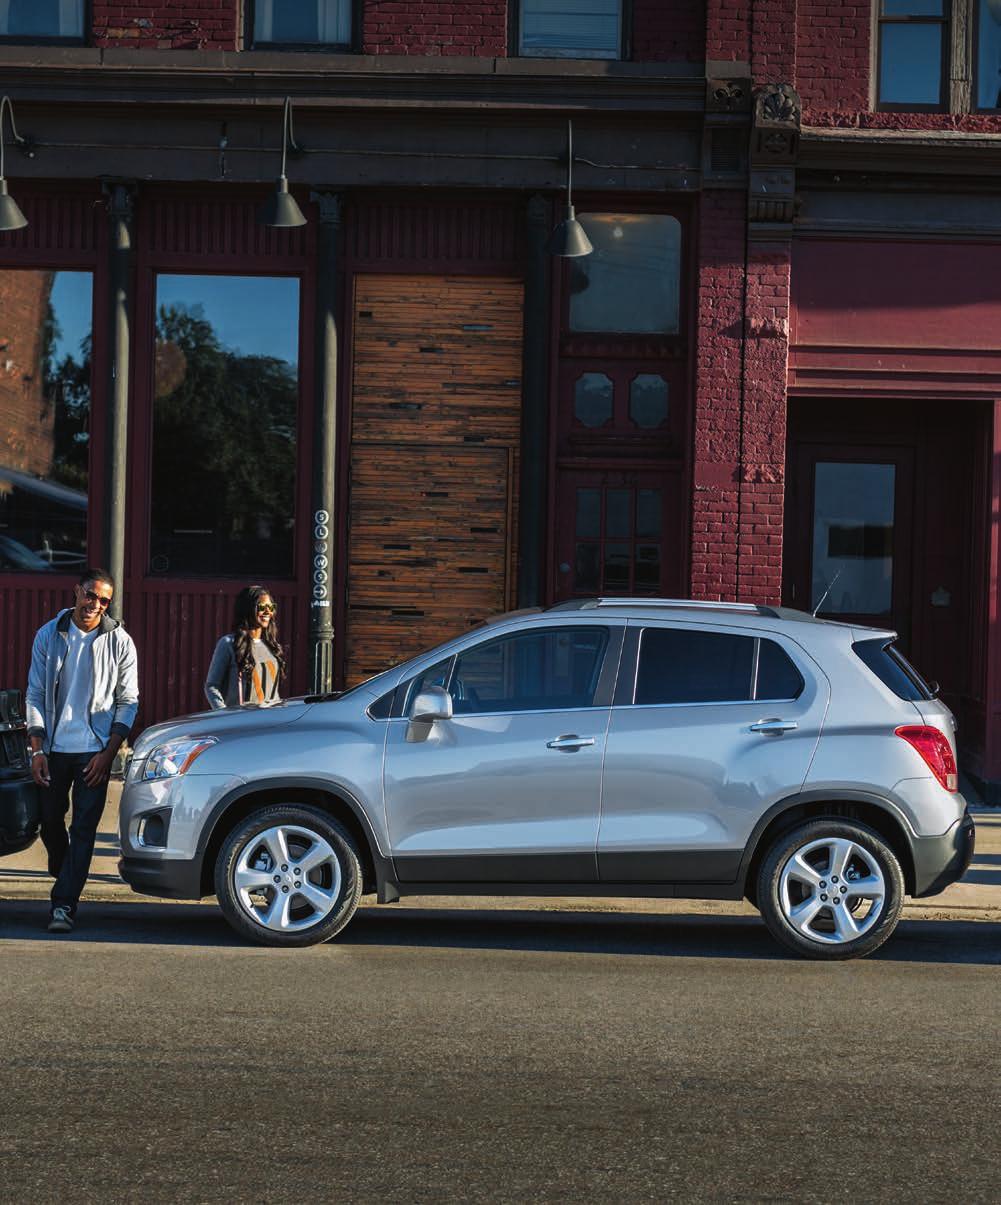 PEACE OF MIND Trax LTZ in Satin Steel Metallic with available features. WE RE WITH YOU ALL THE WAY. Chevrolet Complete Care reflects our commitment to you and your new Trax.